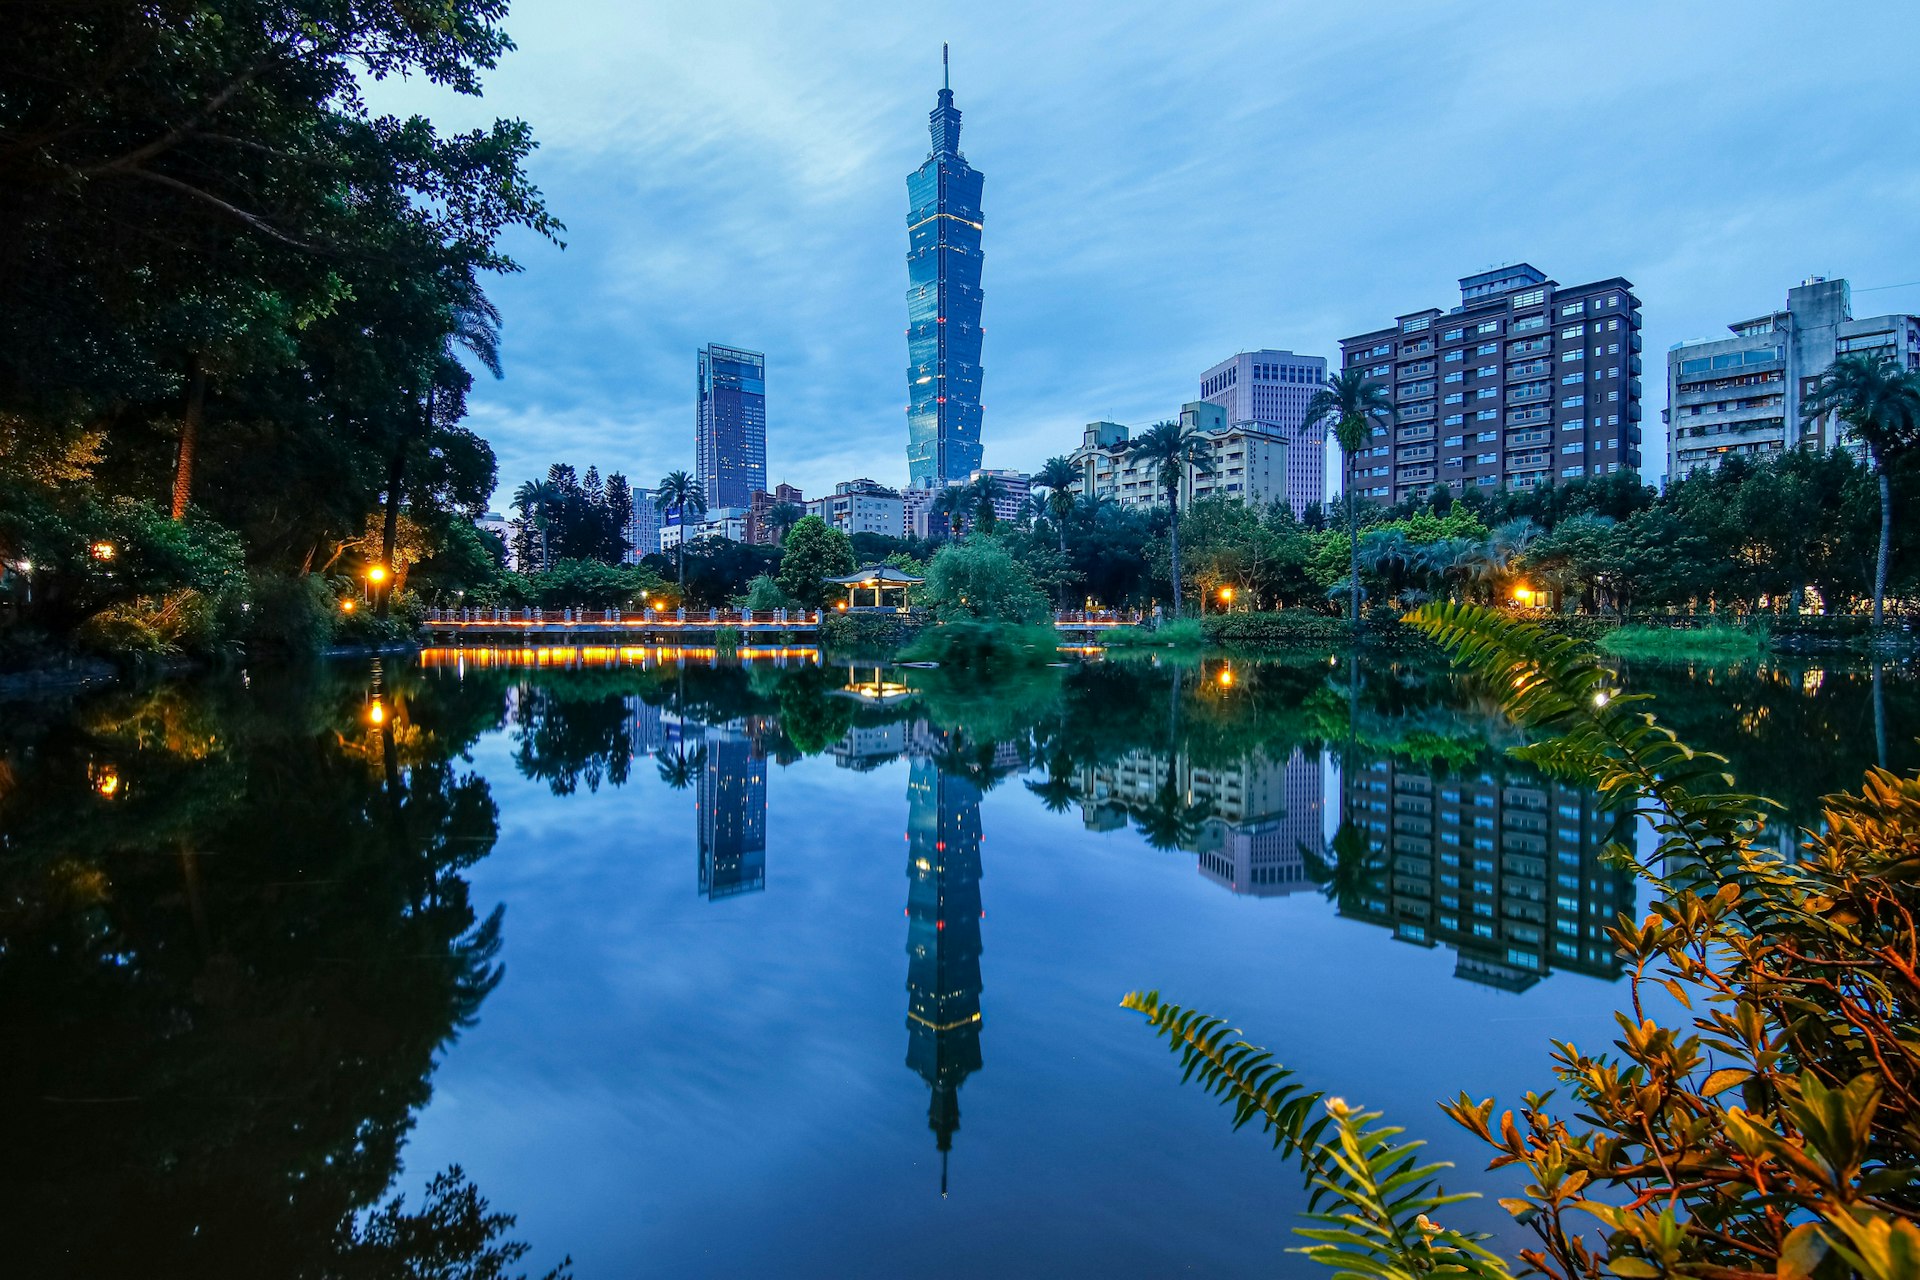 Reflection on water of Taipei 101 skyscraper and other buildings